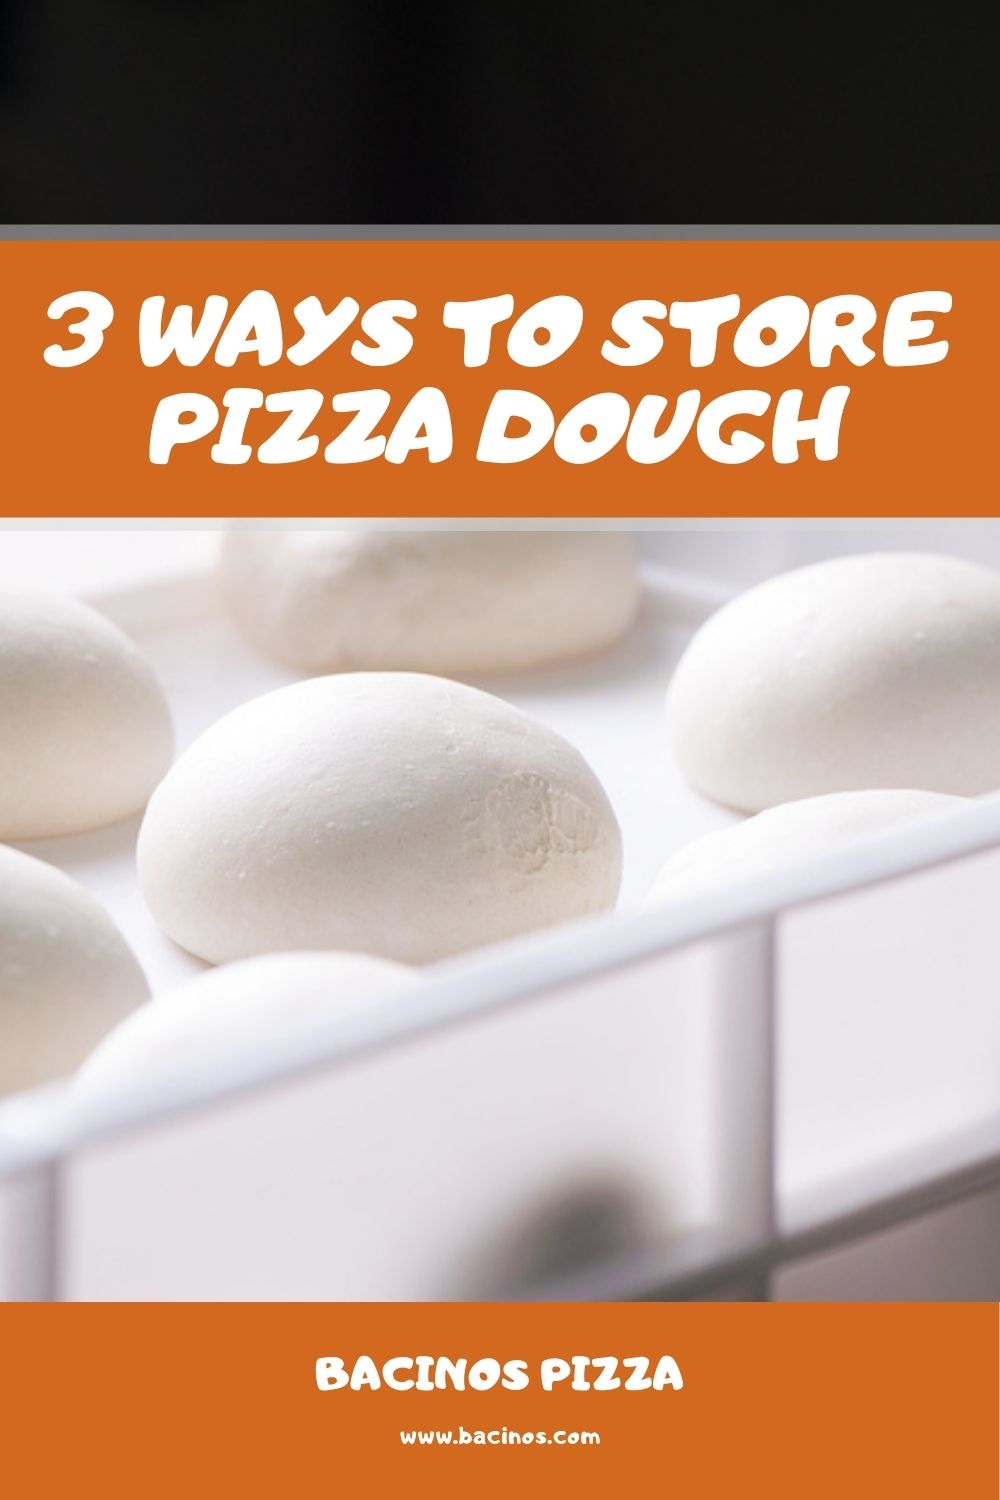 3 Ways to Store Pizza Dough 2